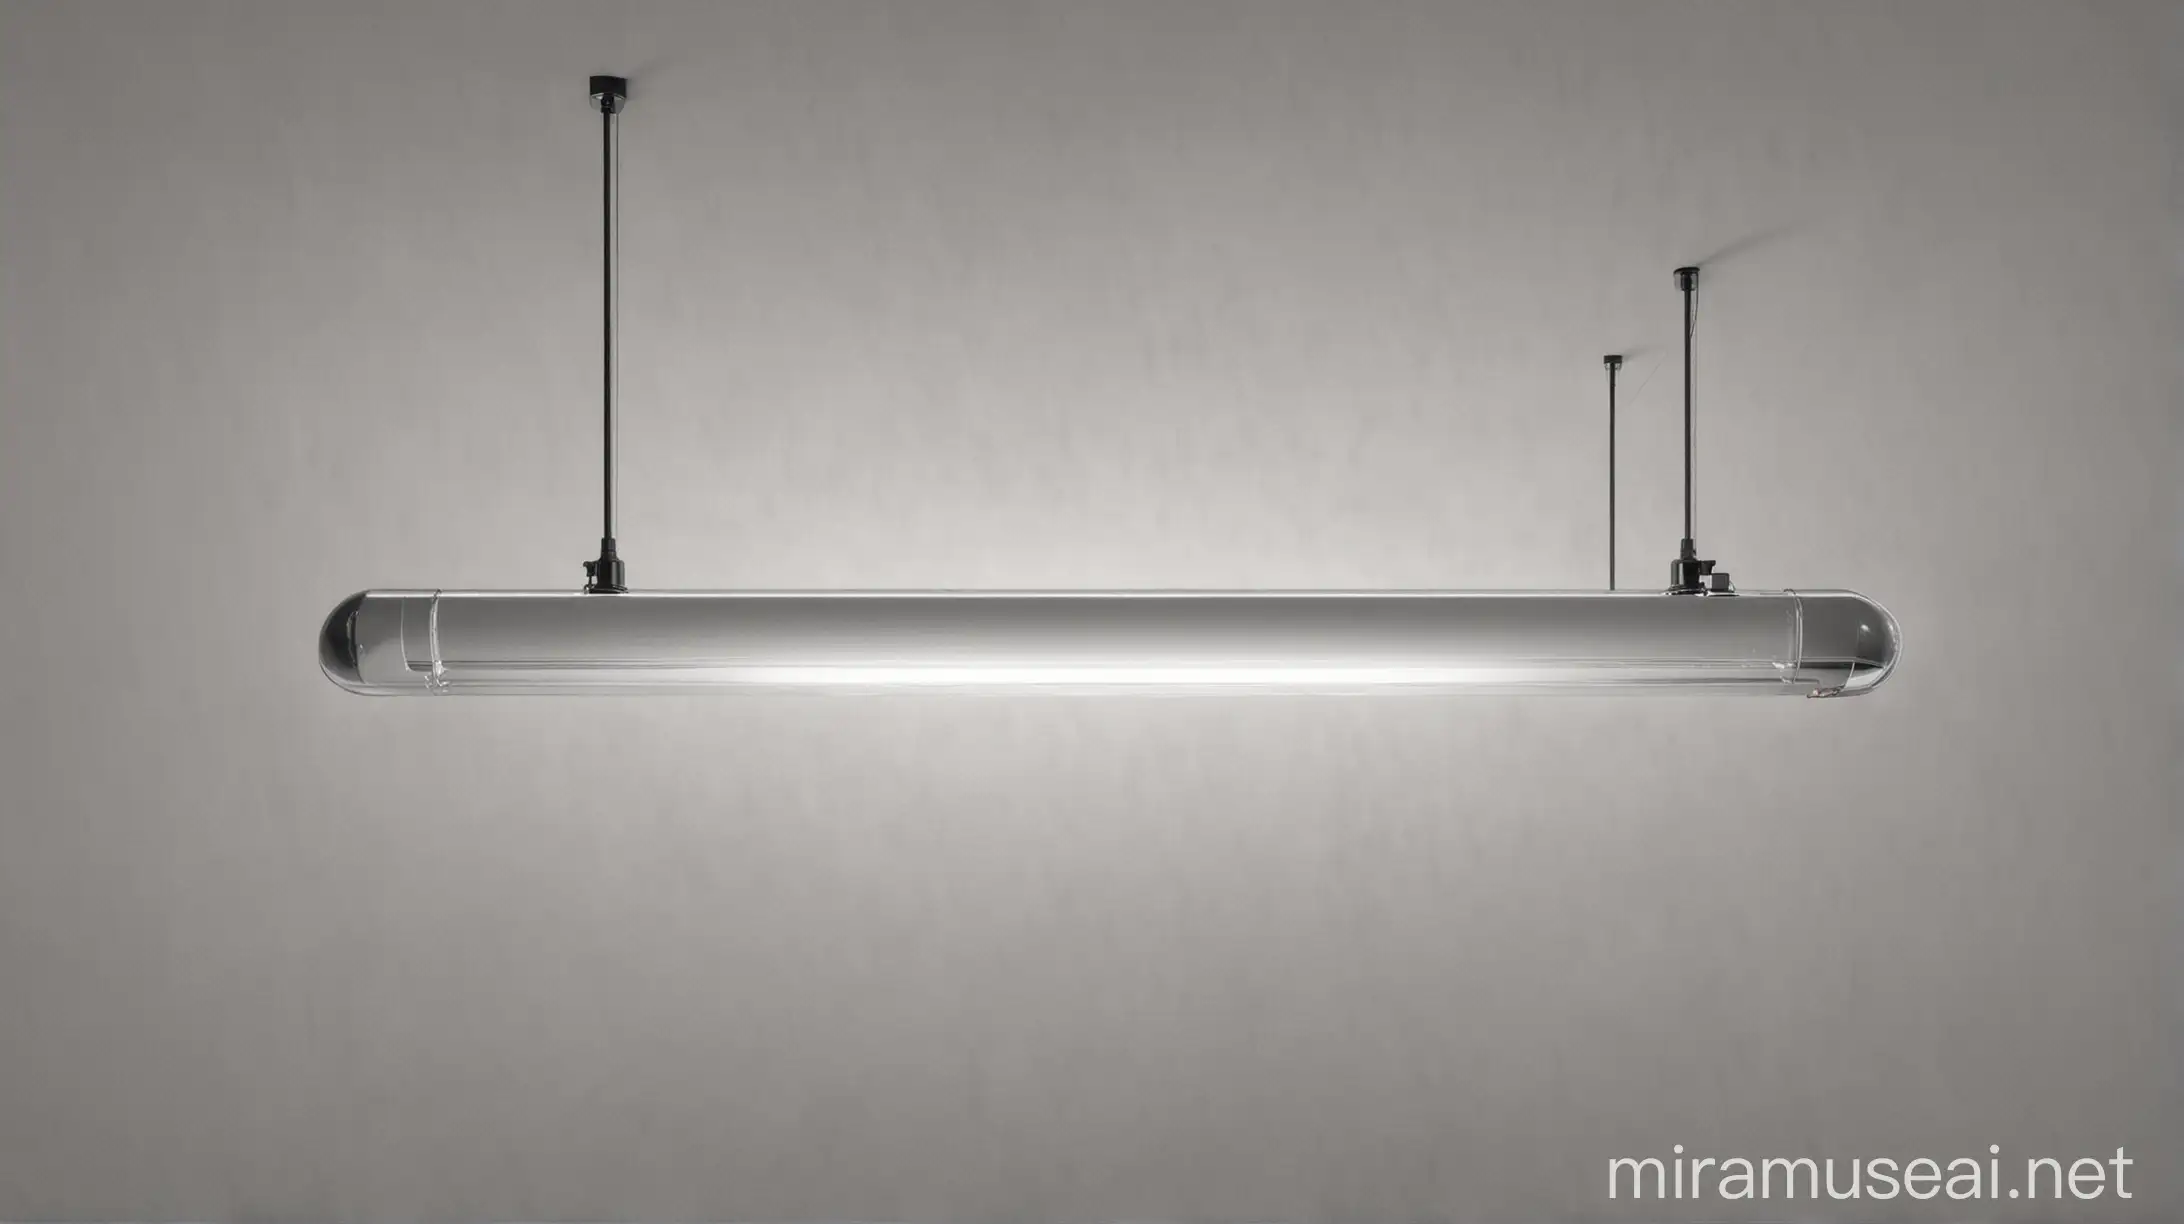 Minimalist Front View Ceiling Tube Light Design